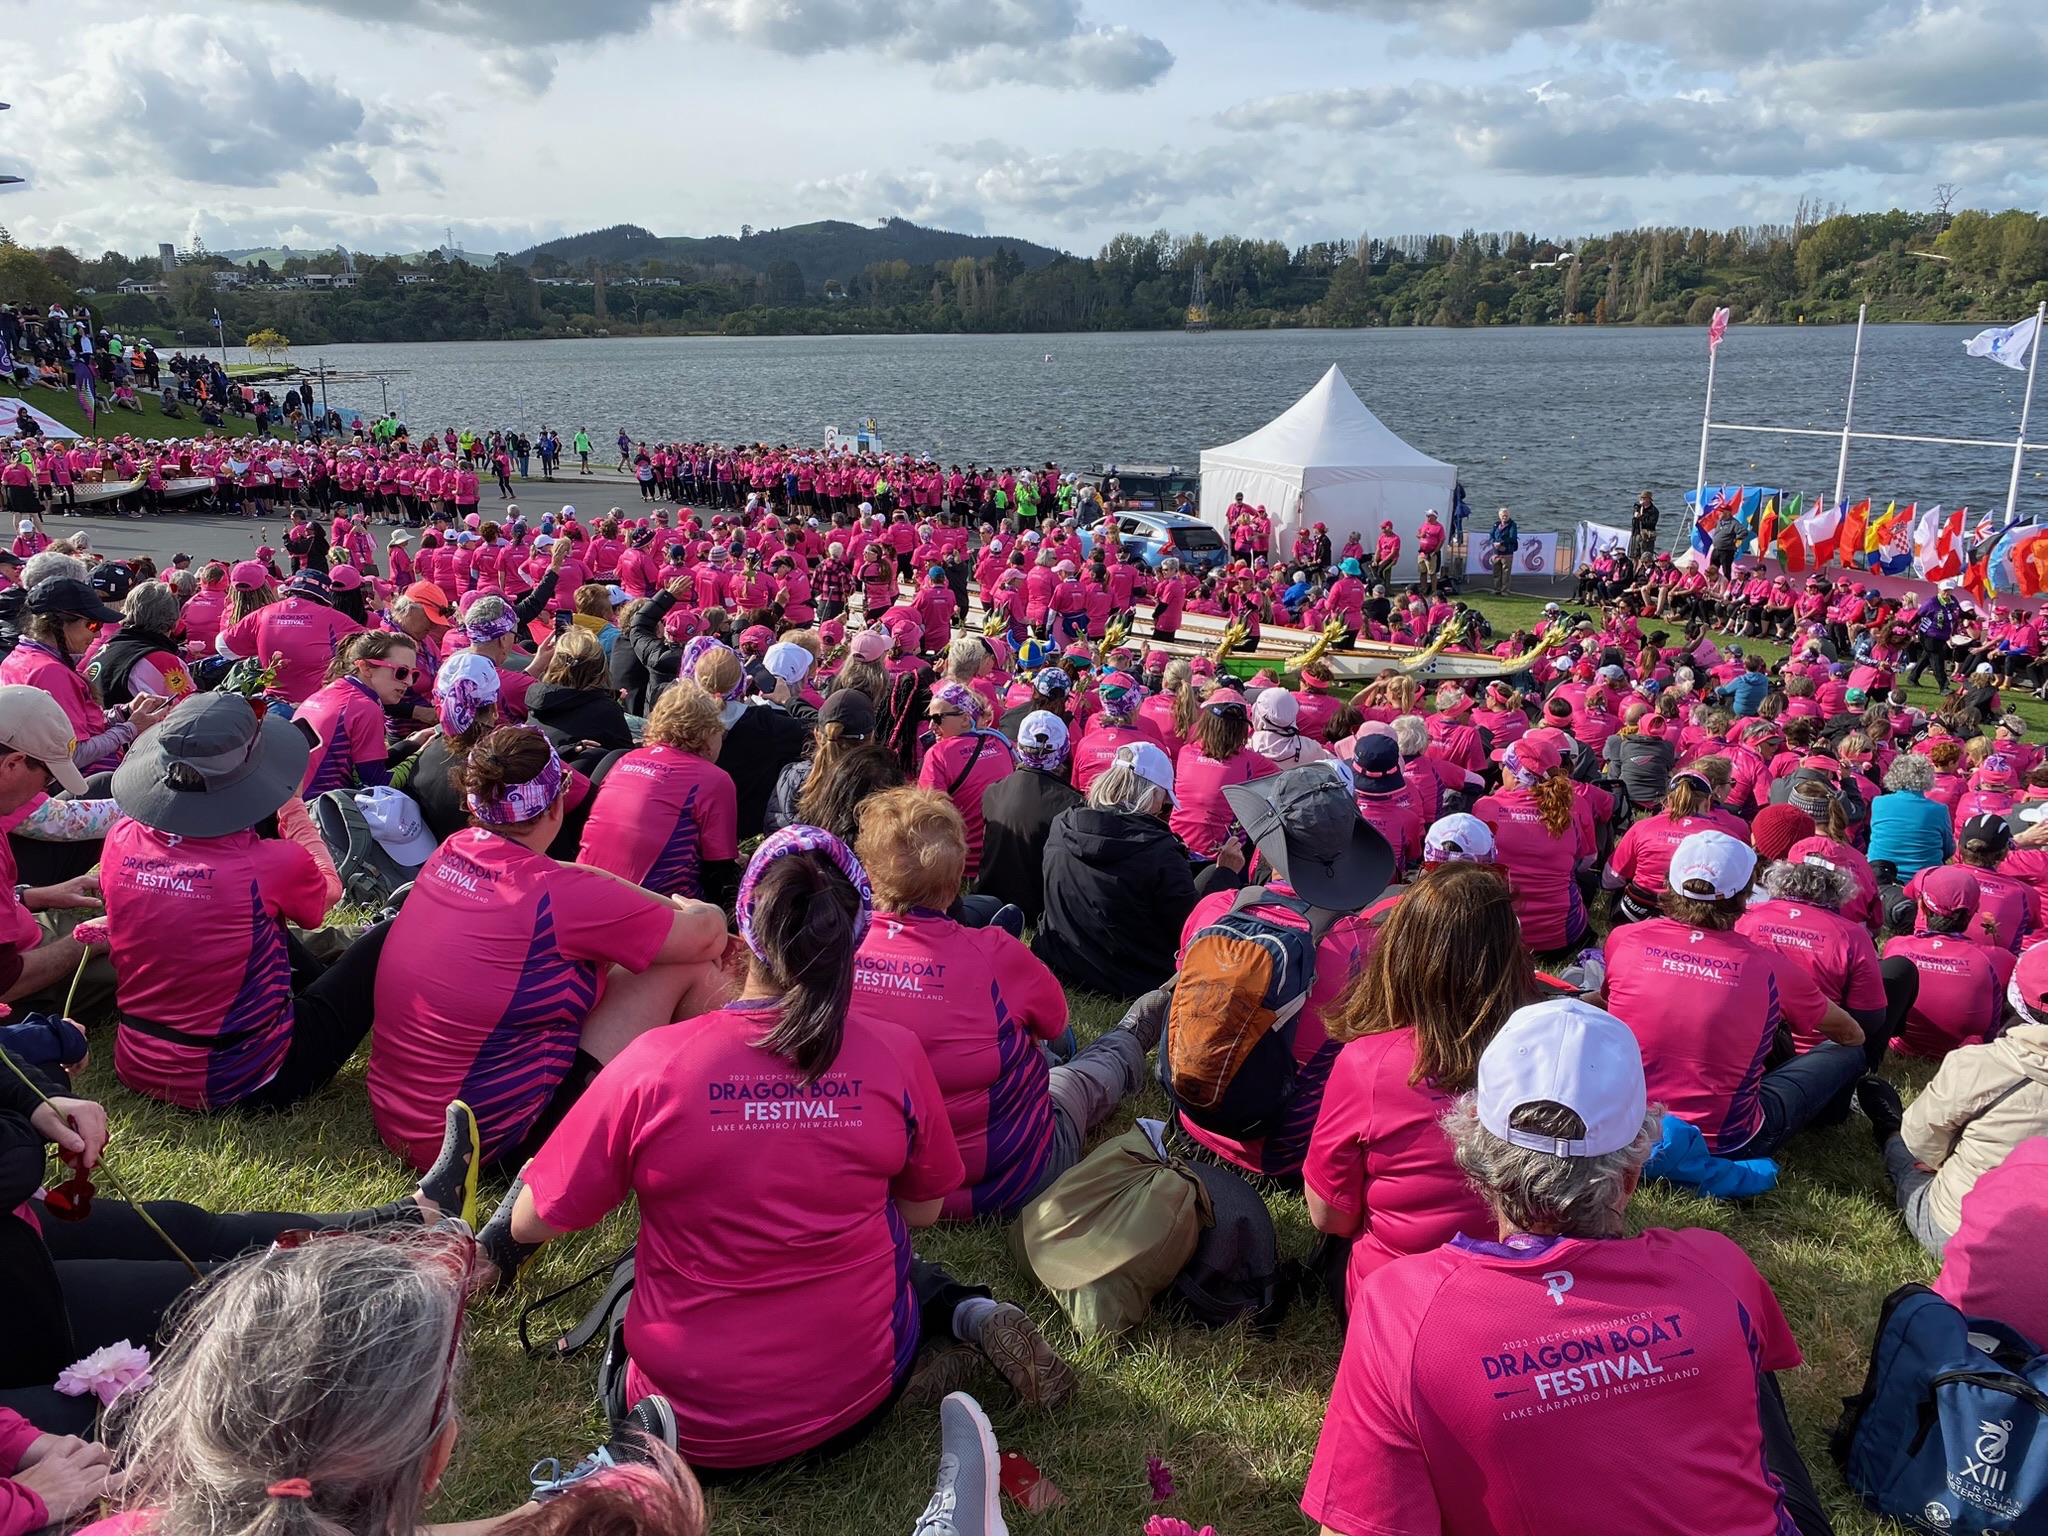 Image of a dragon boat festival "flower ceremony" to honor those with breast cancer, and a map from Boston to New Zealand where the 2022 festival is located